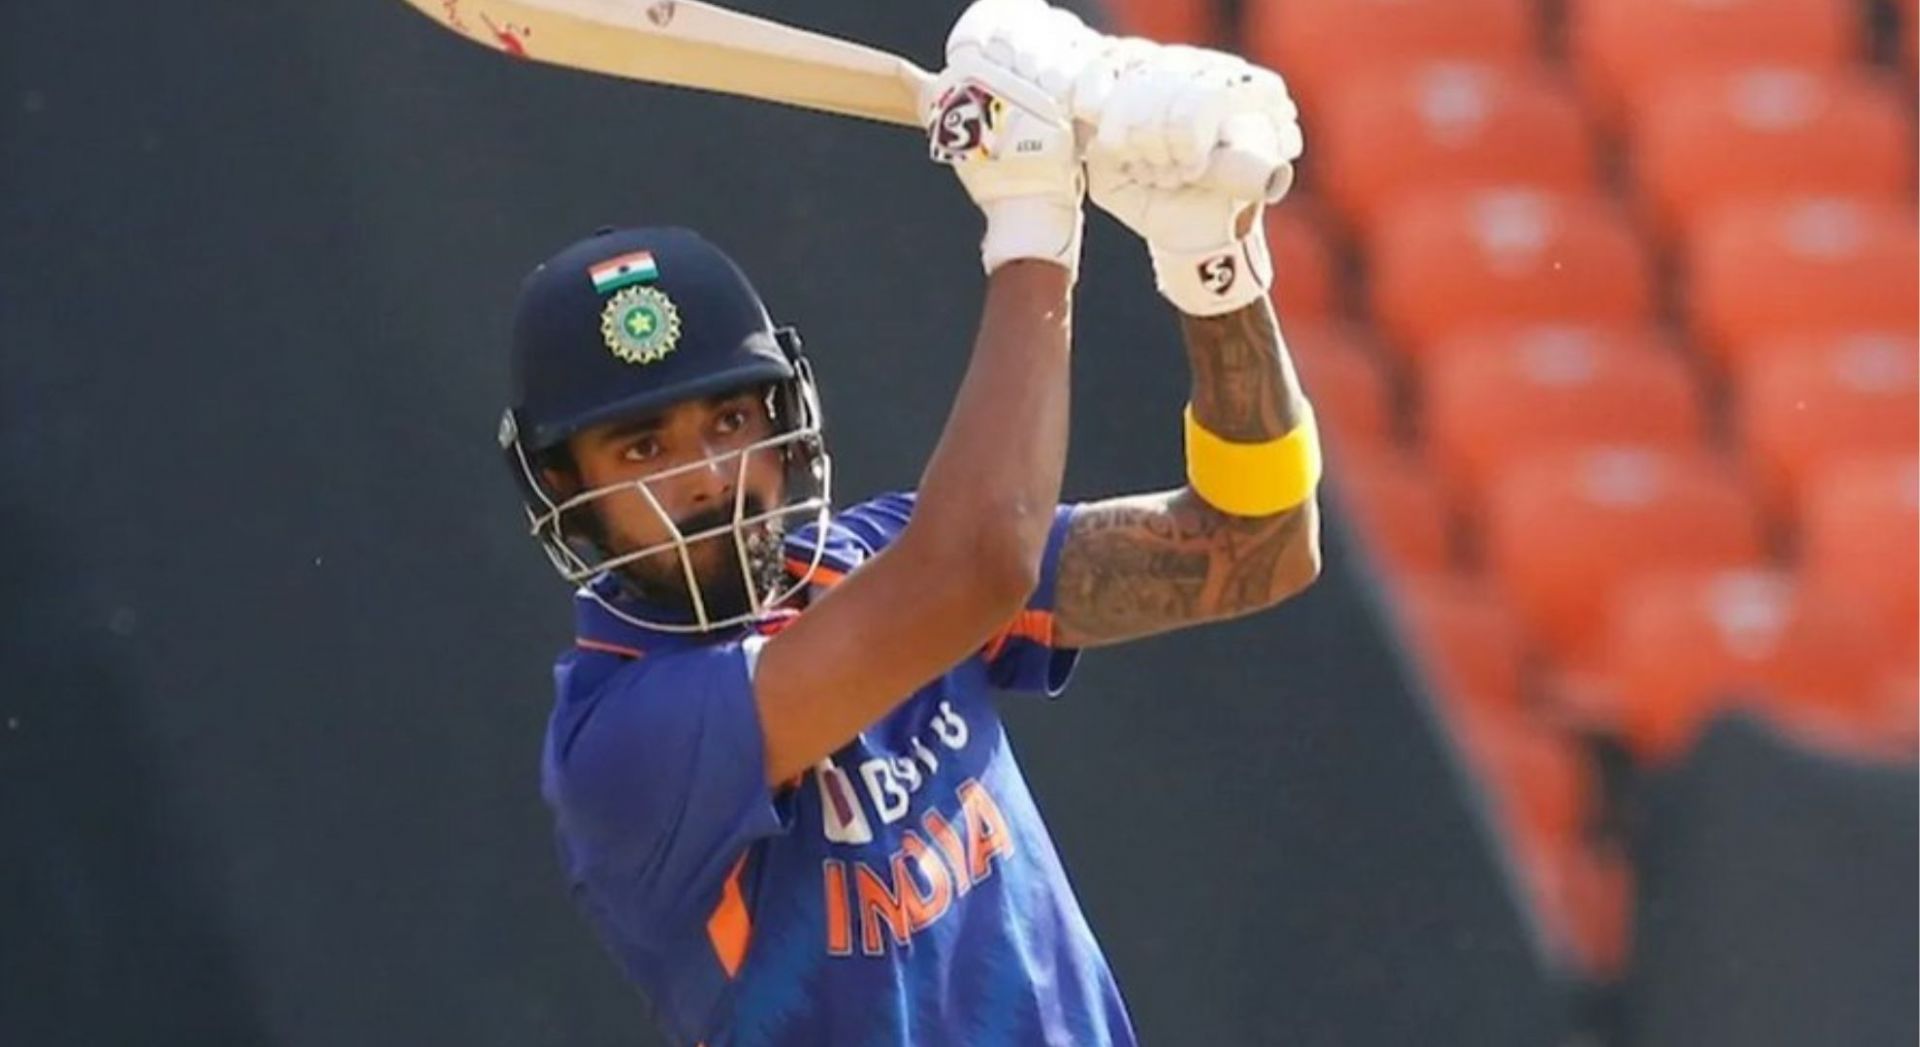 KL Rahul last played for India in February. [Pic courtesy: BCCI]